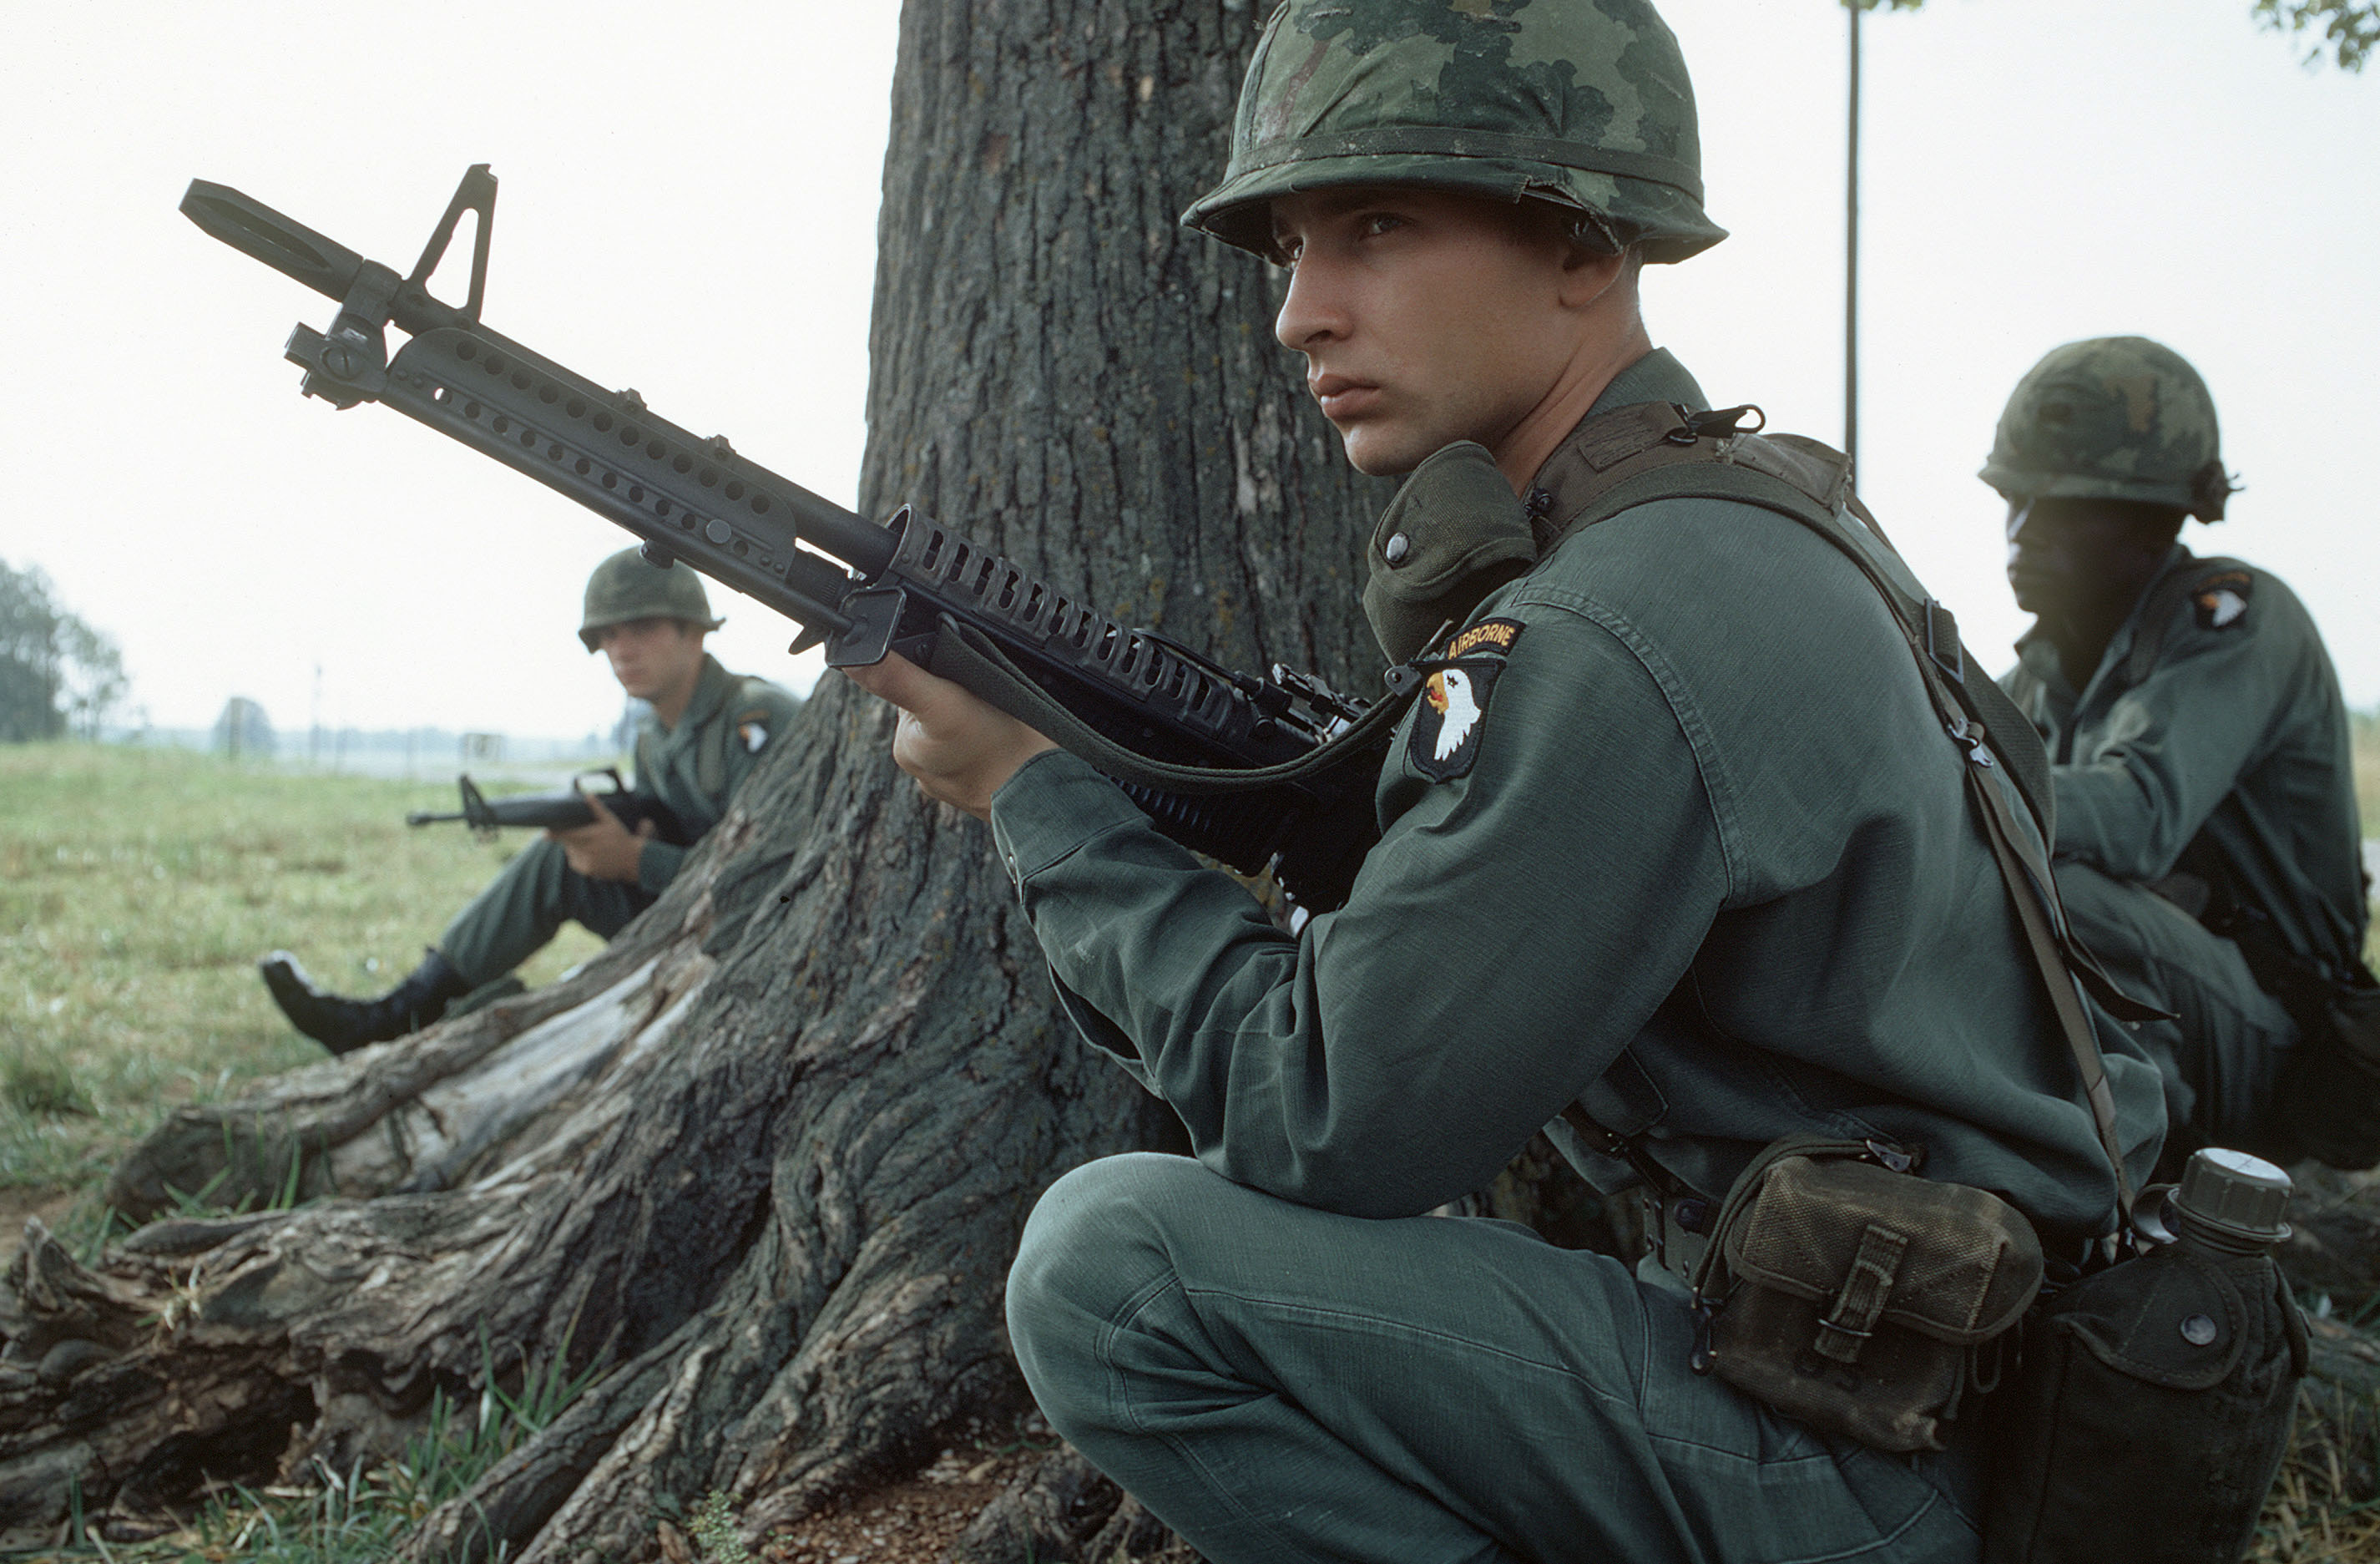 Member Of The 101st Airborne Division Armed With An M60 Machine Gun